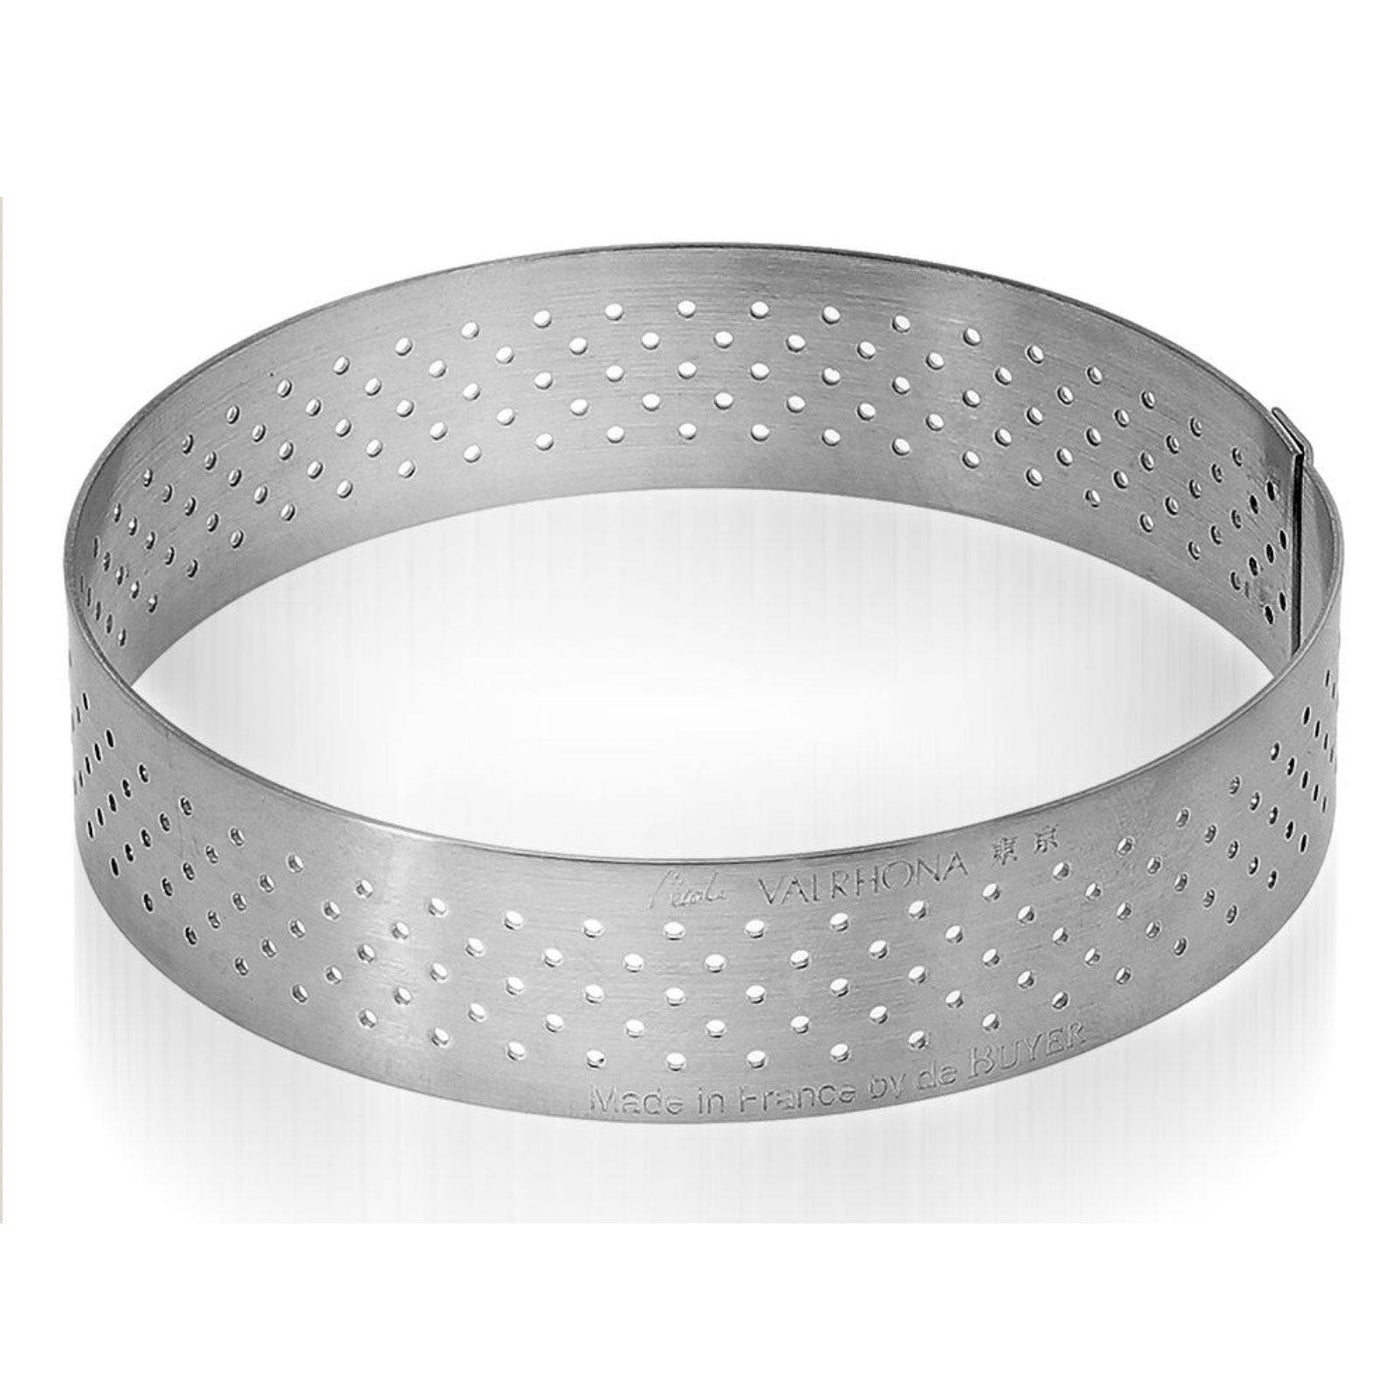 de Buyer Valrhona Stainless Steel Perforated Tart Ring, 2.16-in. - Kitchen Universe